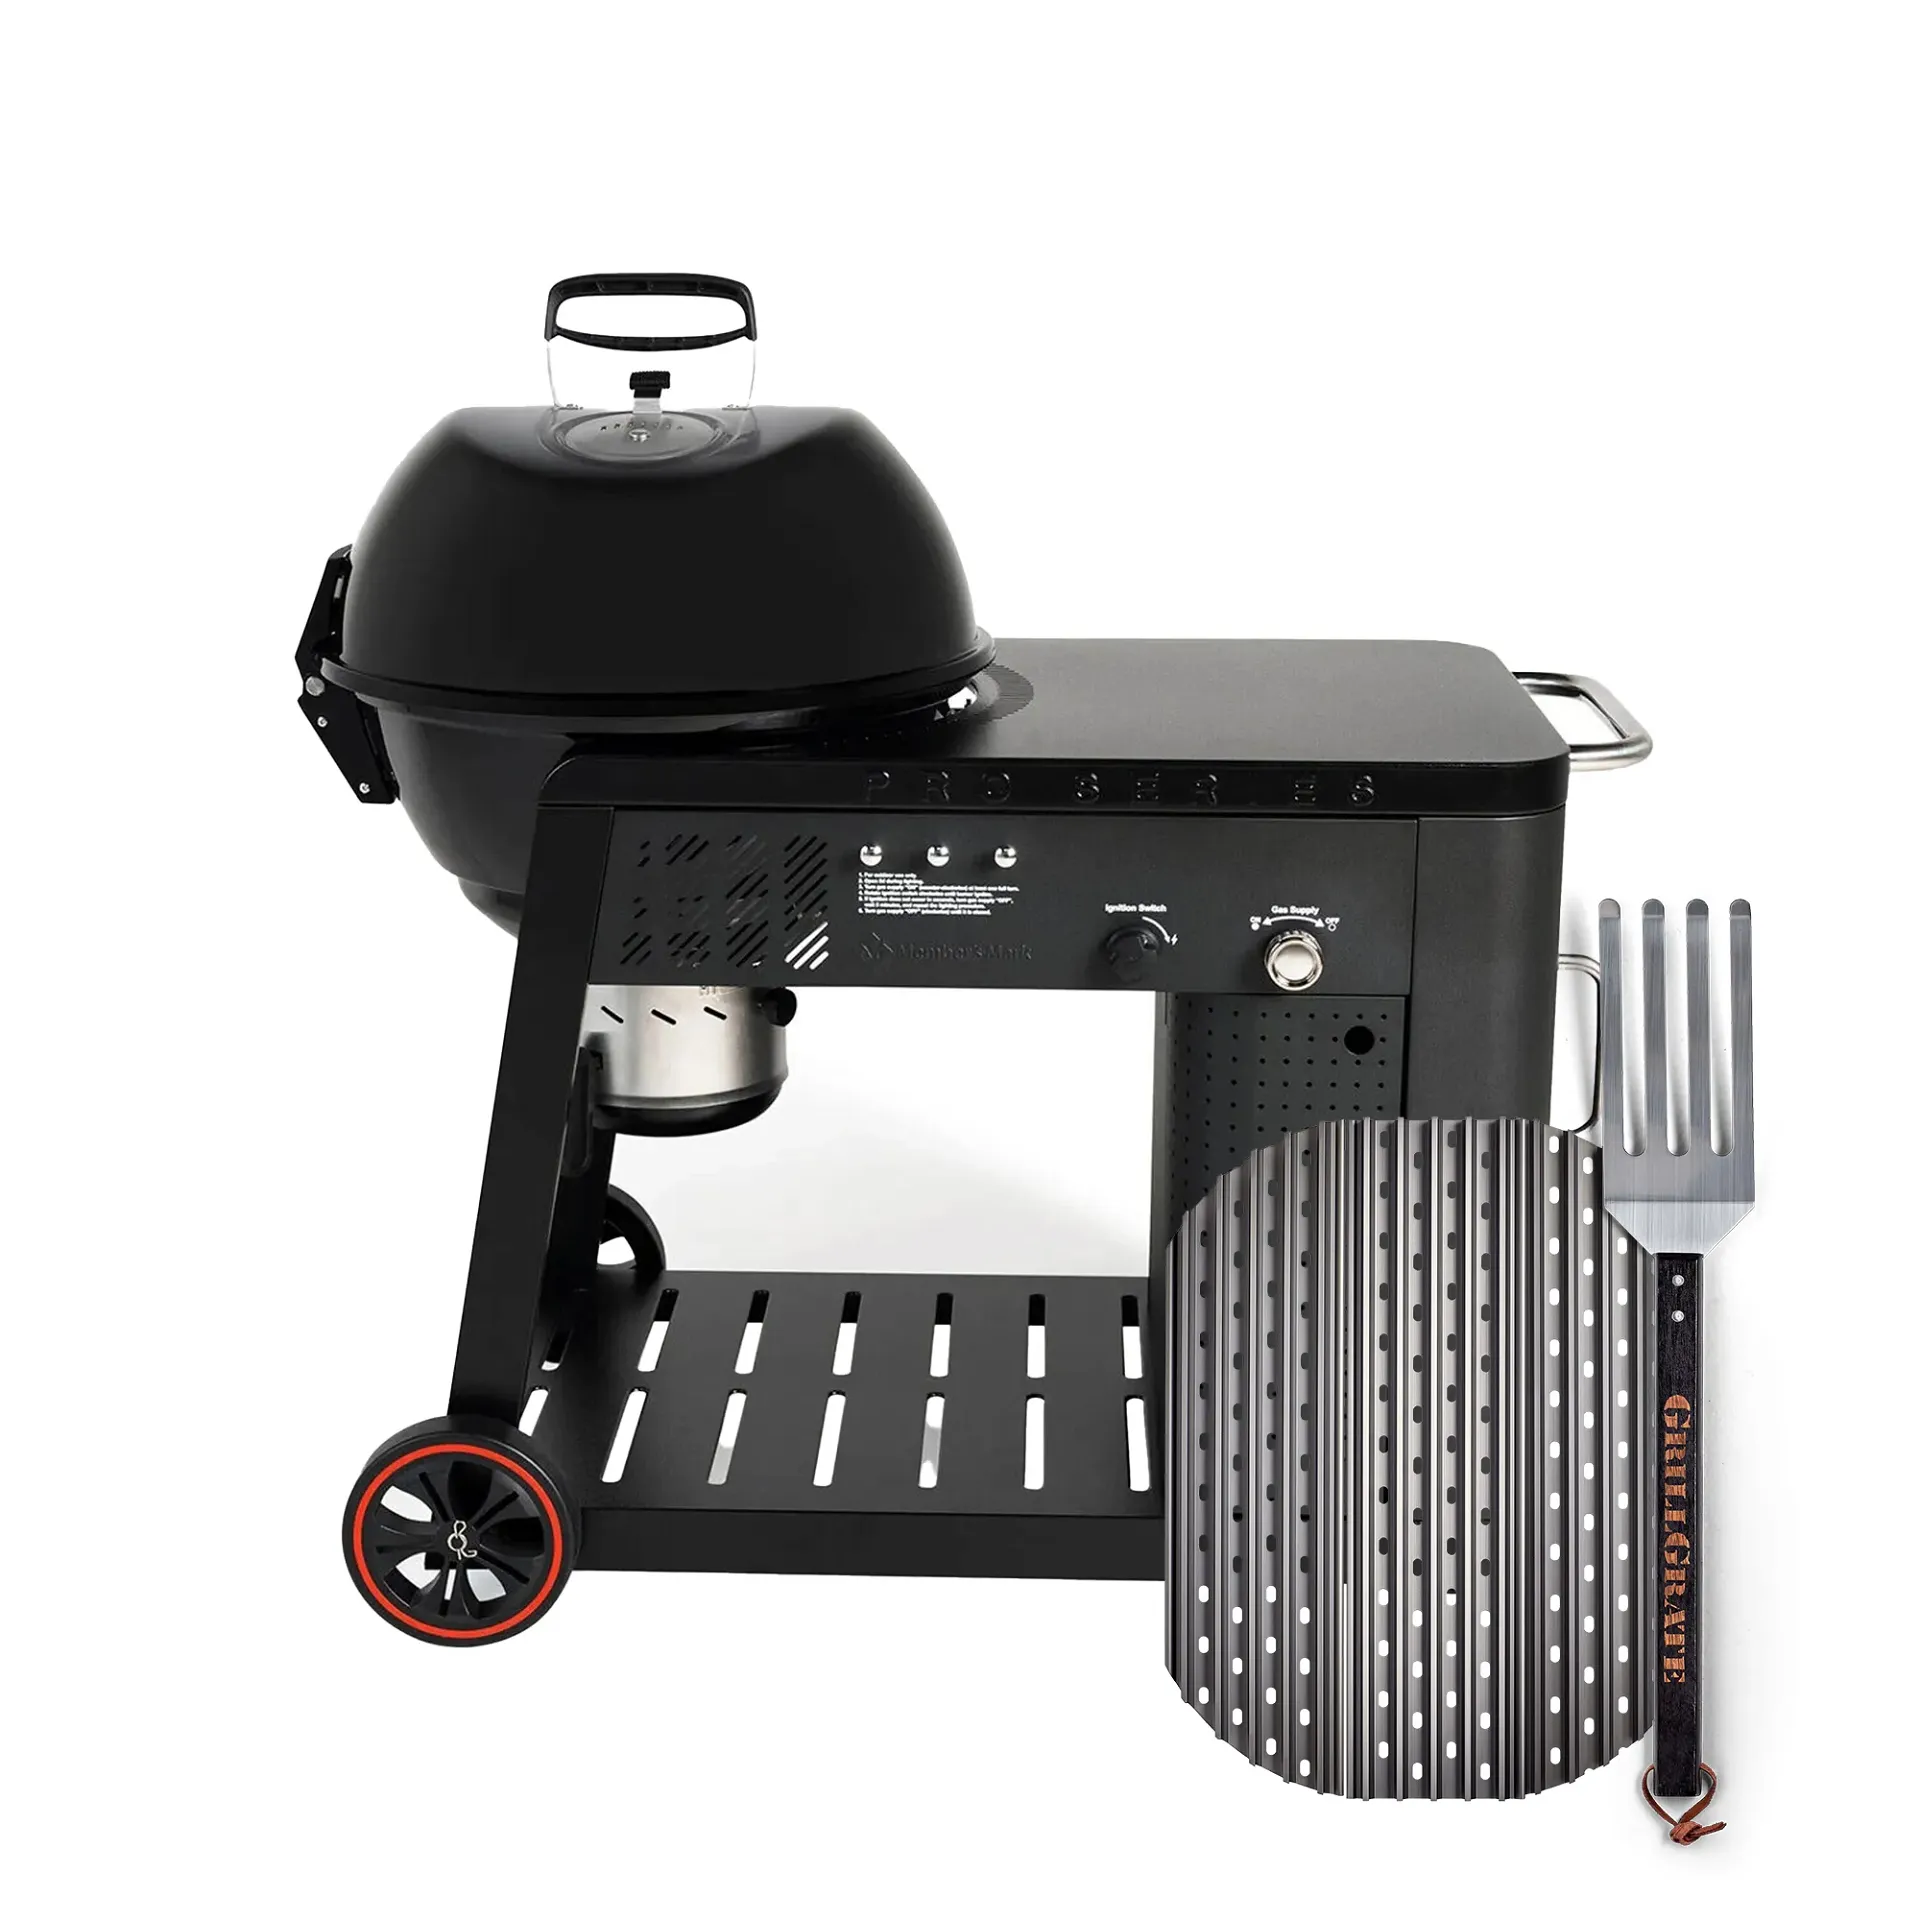 GrillGrates Review 2022: My New Favorite Grilling Accessory